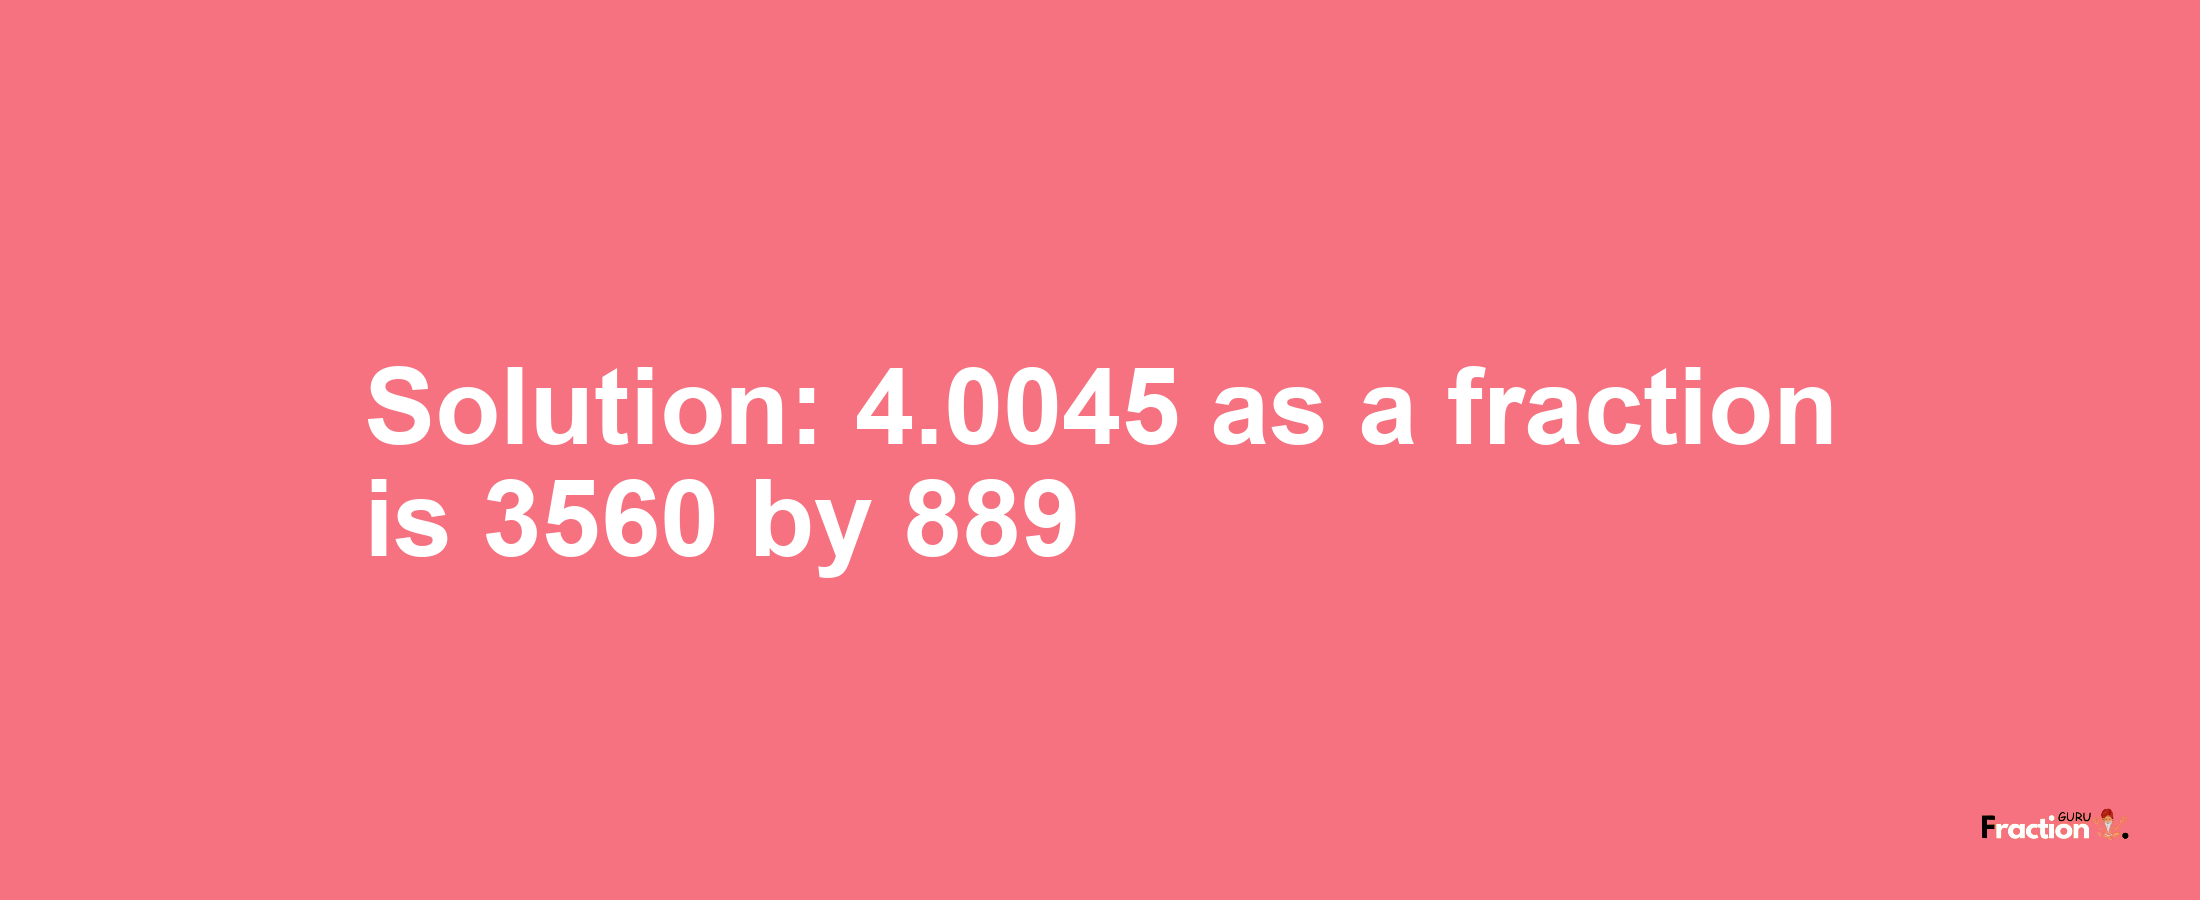 Solution:4.0045 as a fraction is 3560/889